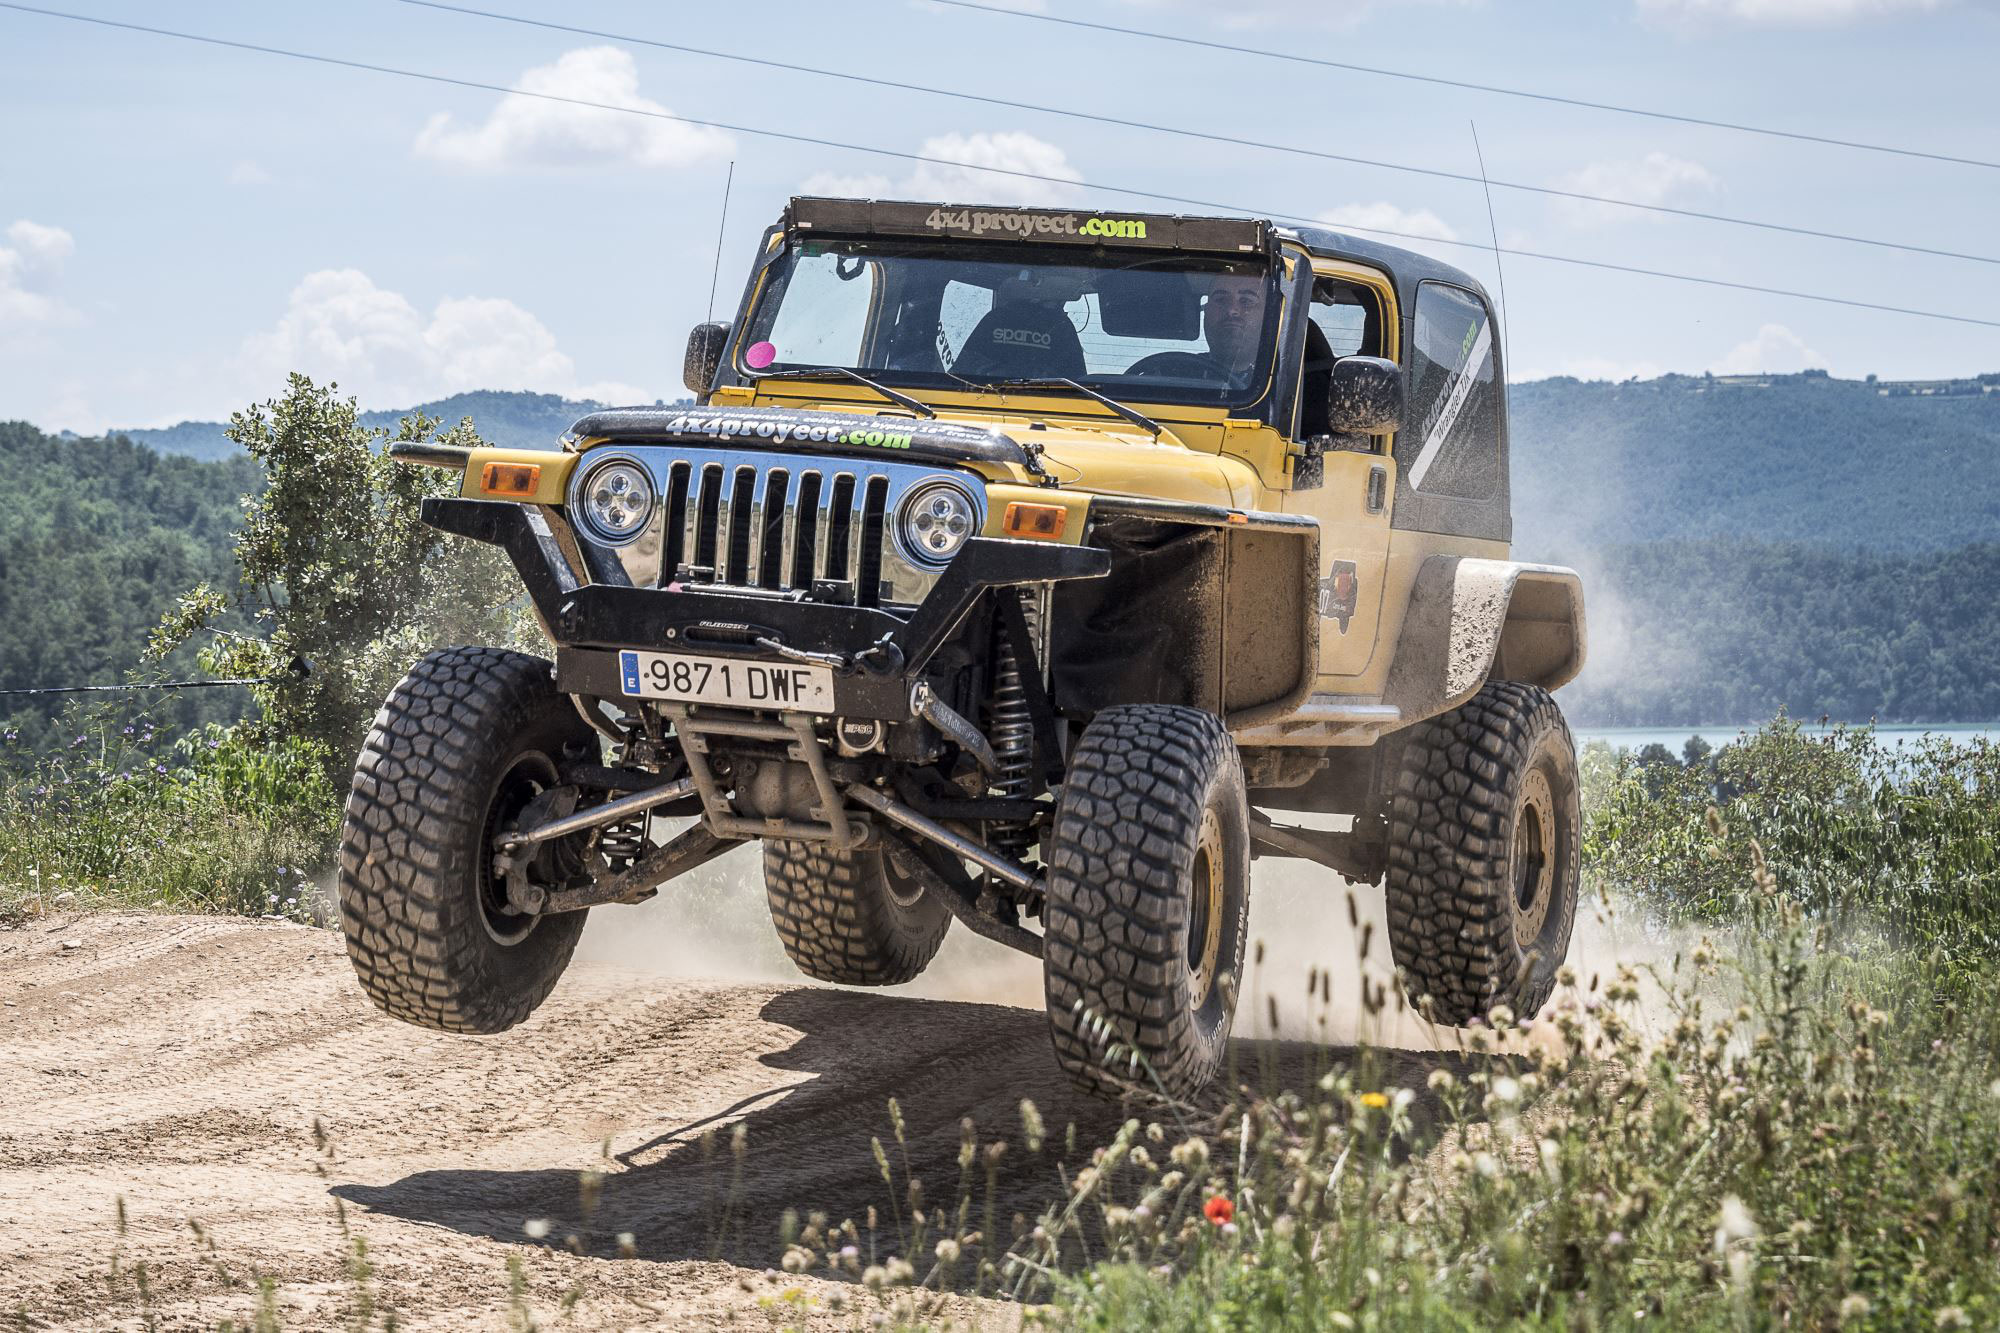 A Wrangler TJ with the Independent Front Suspension - OFFROAD LIFESTYLE -  OFFROAD Lifestyle web magazine